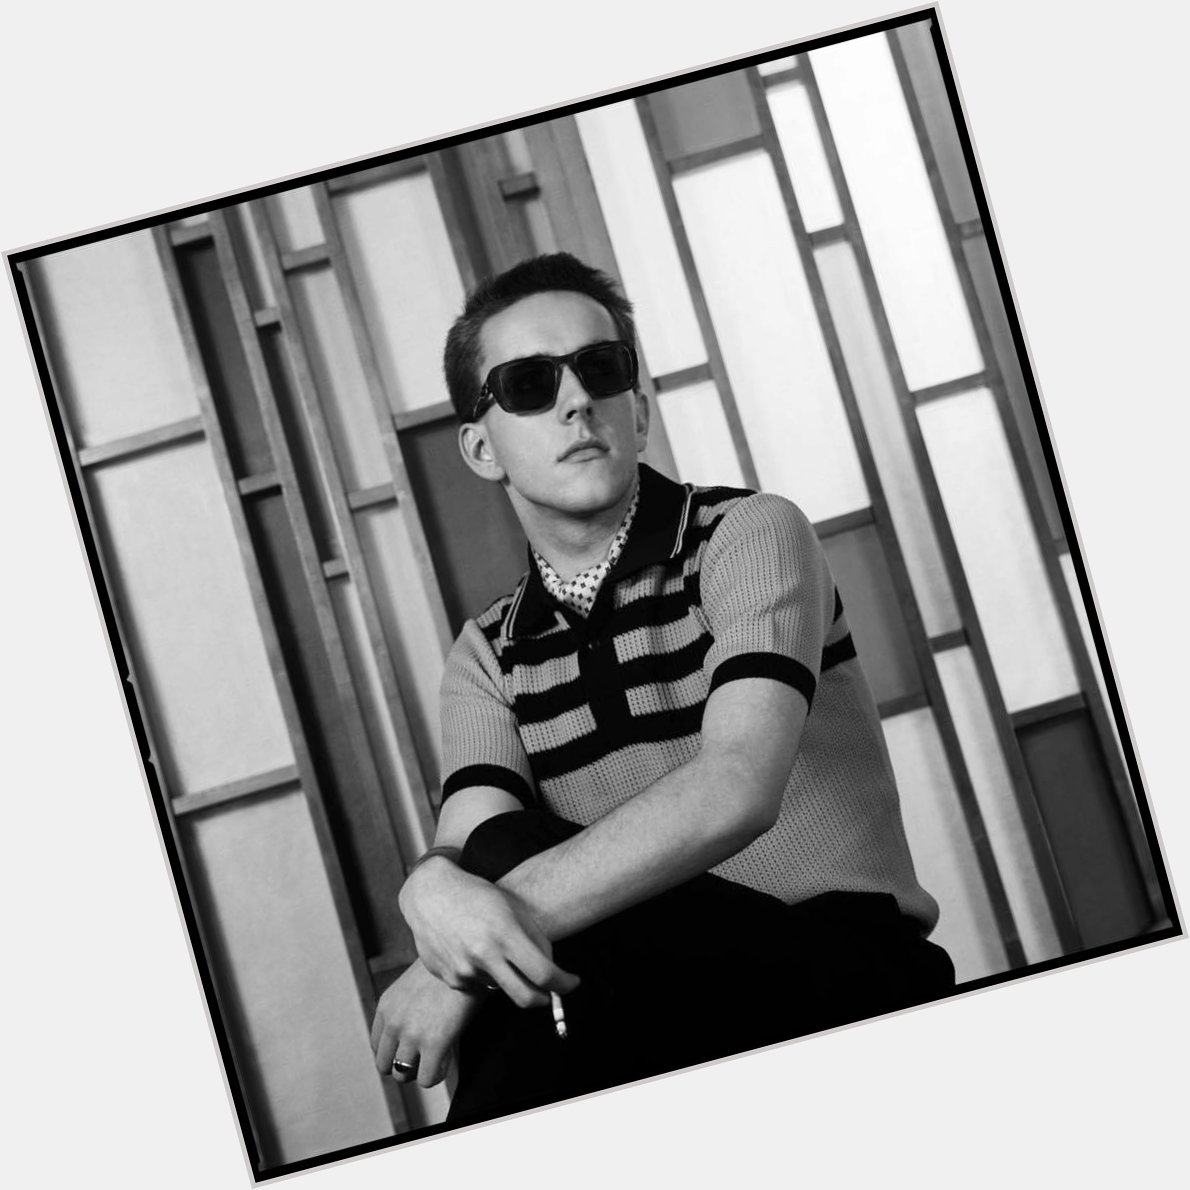 Happy Birthday Terry Hall

The Specials - Ghost Town

 